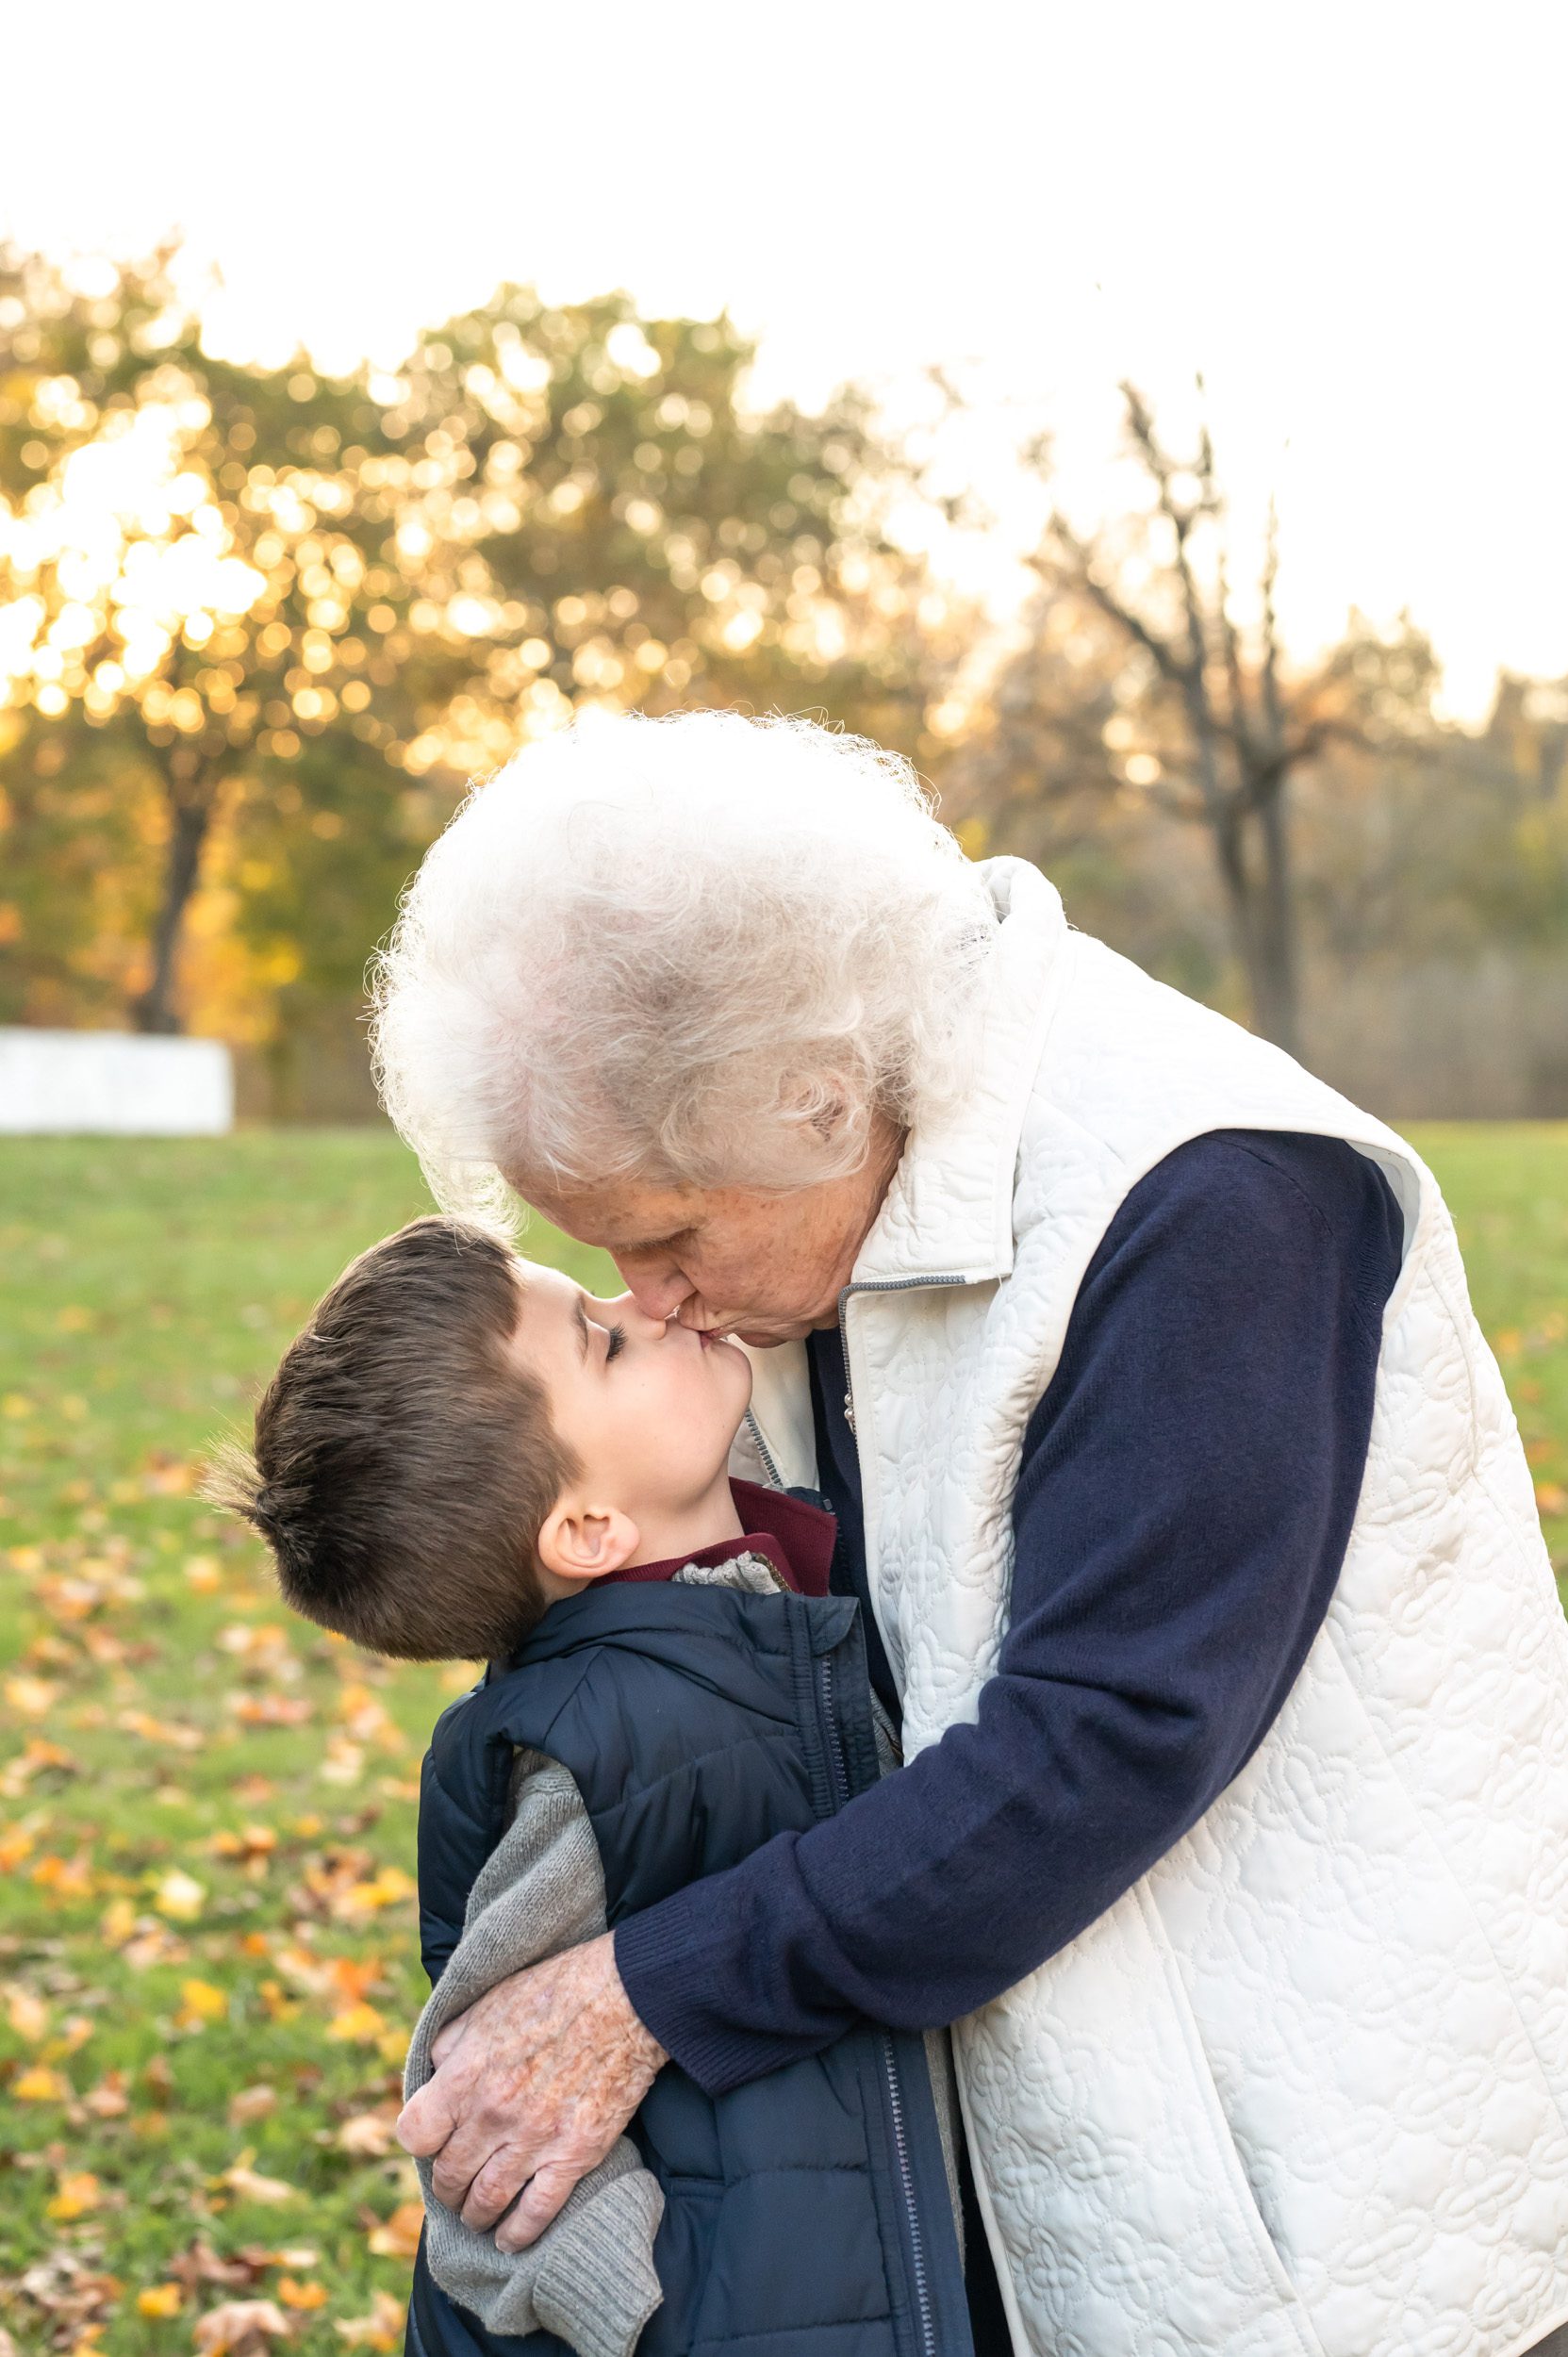 A grandmother hugging and kissing her grandson during an extended family photo session